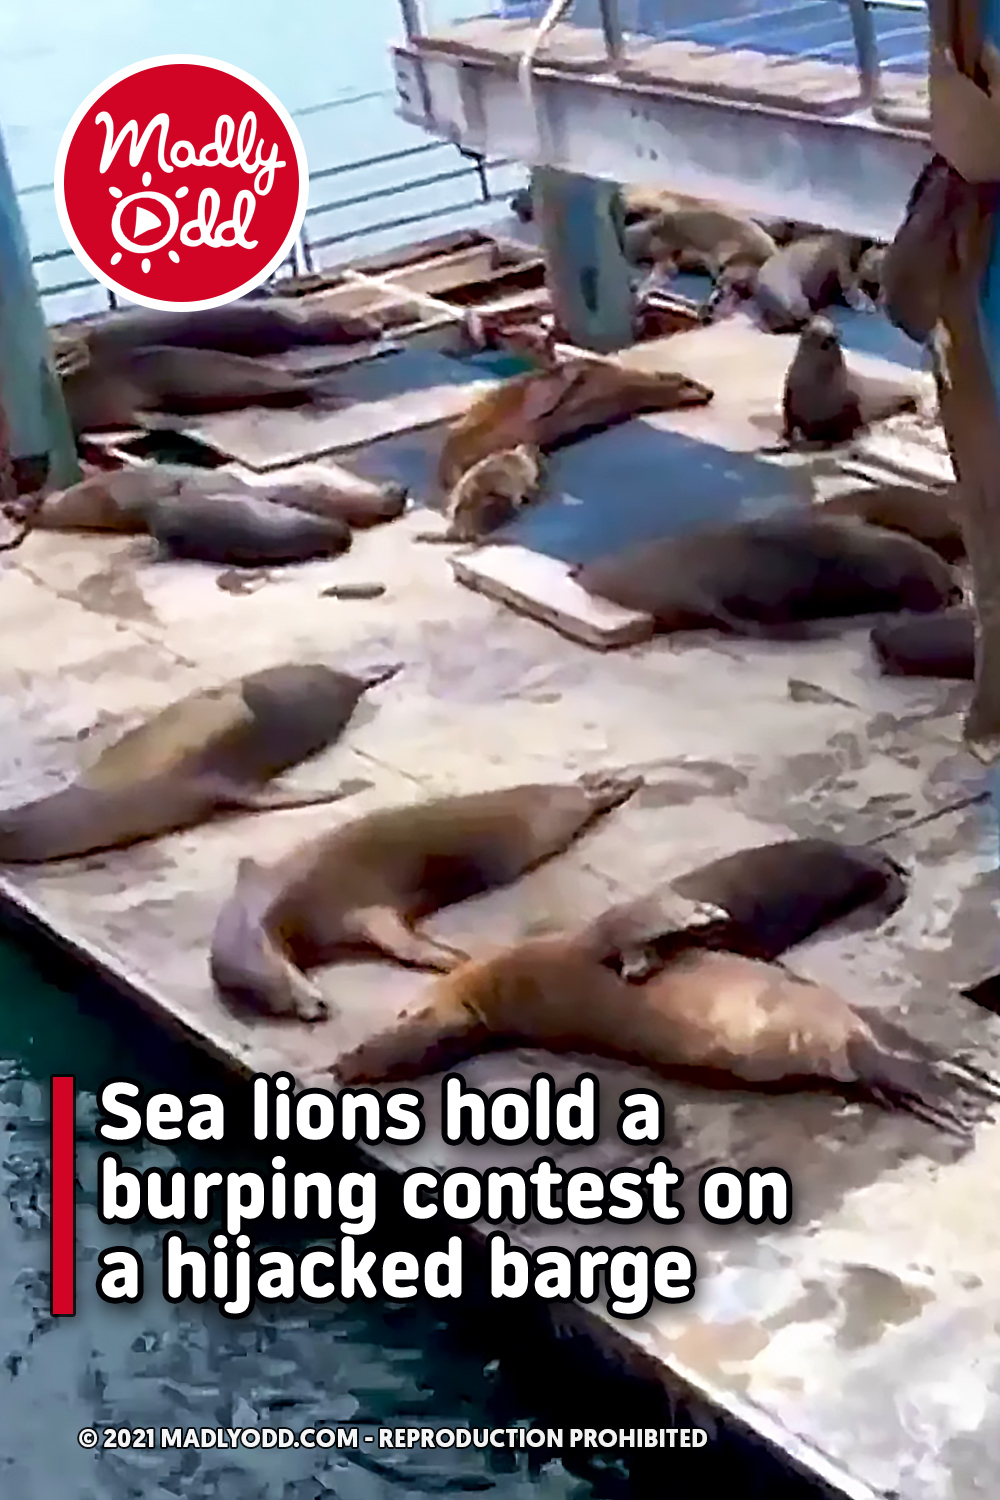 Sea lions hold a burping contest on a hijacked barge